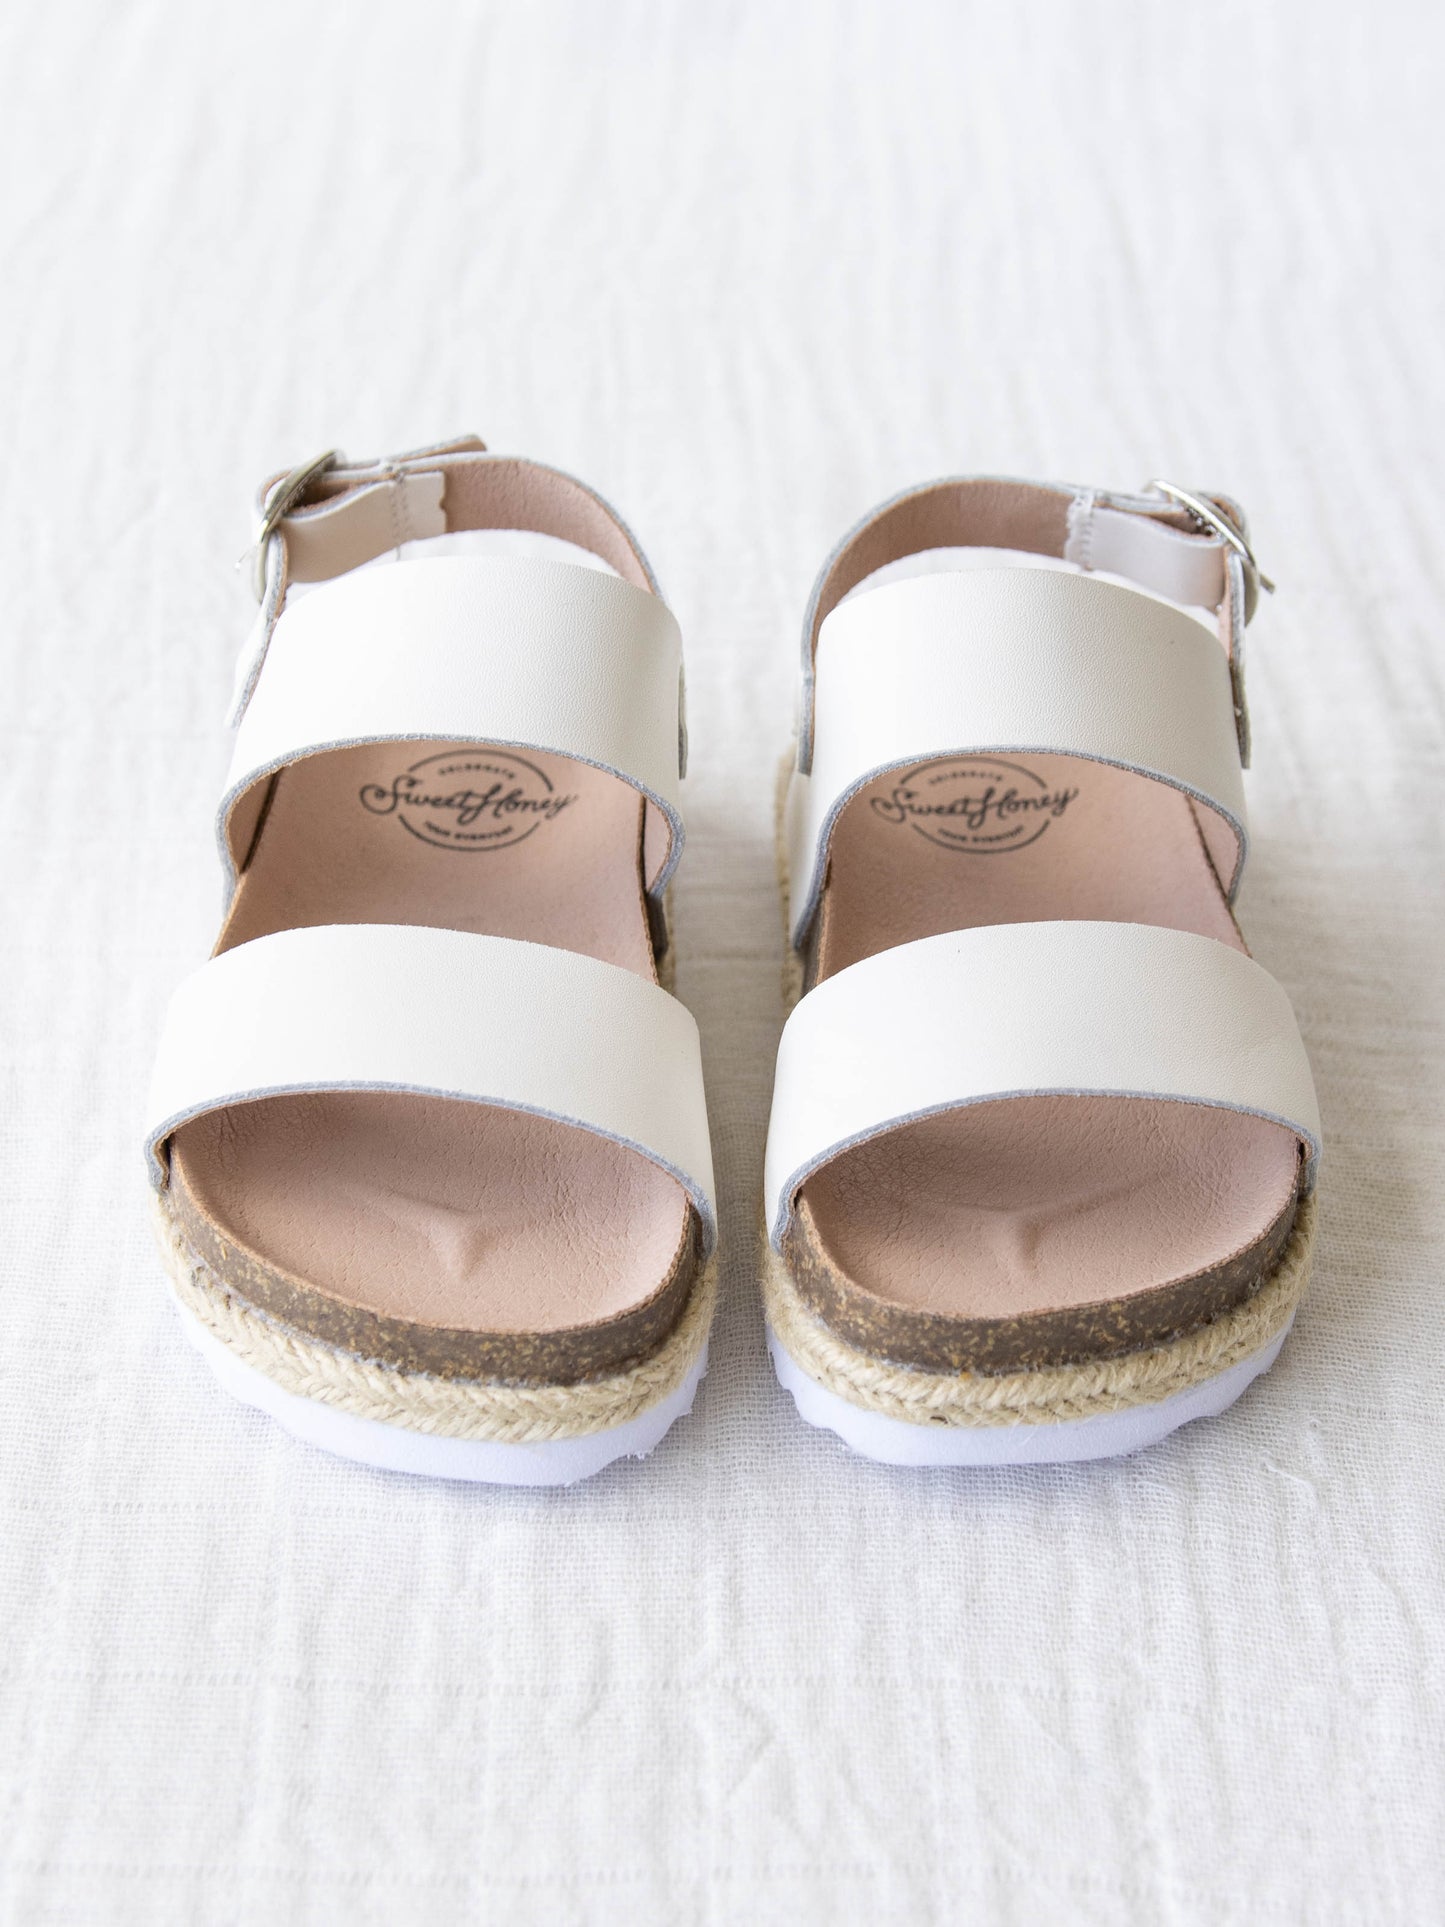 These Strappy Cork Sandals are made of wide strips of Ivory manmade leather, cork sole, and have a metal adjustable buckle.